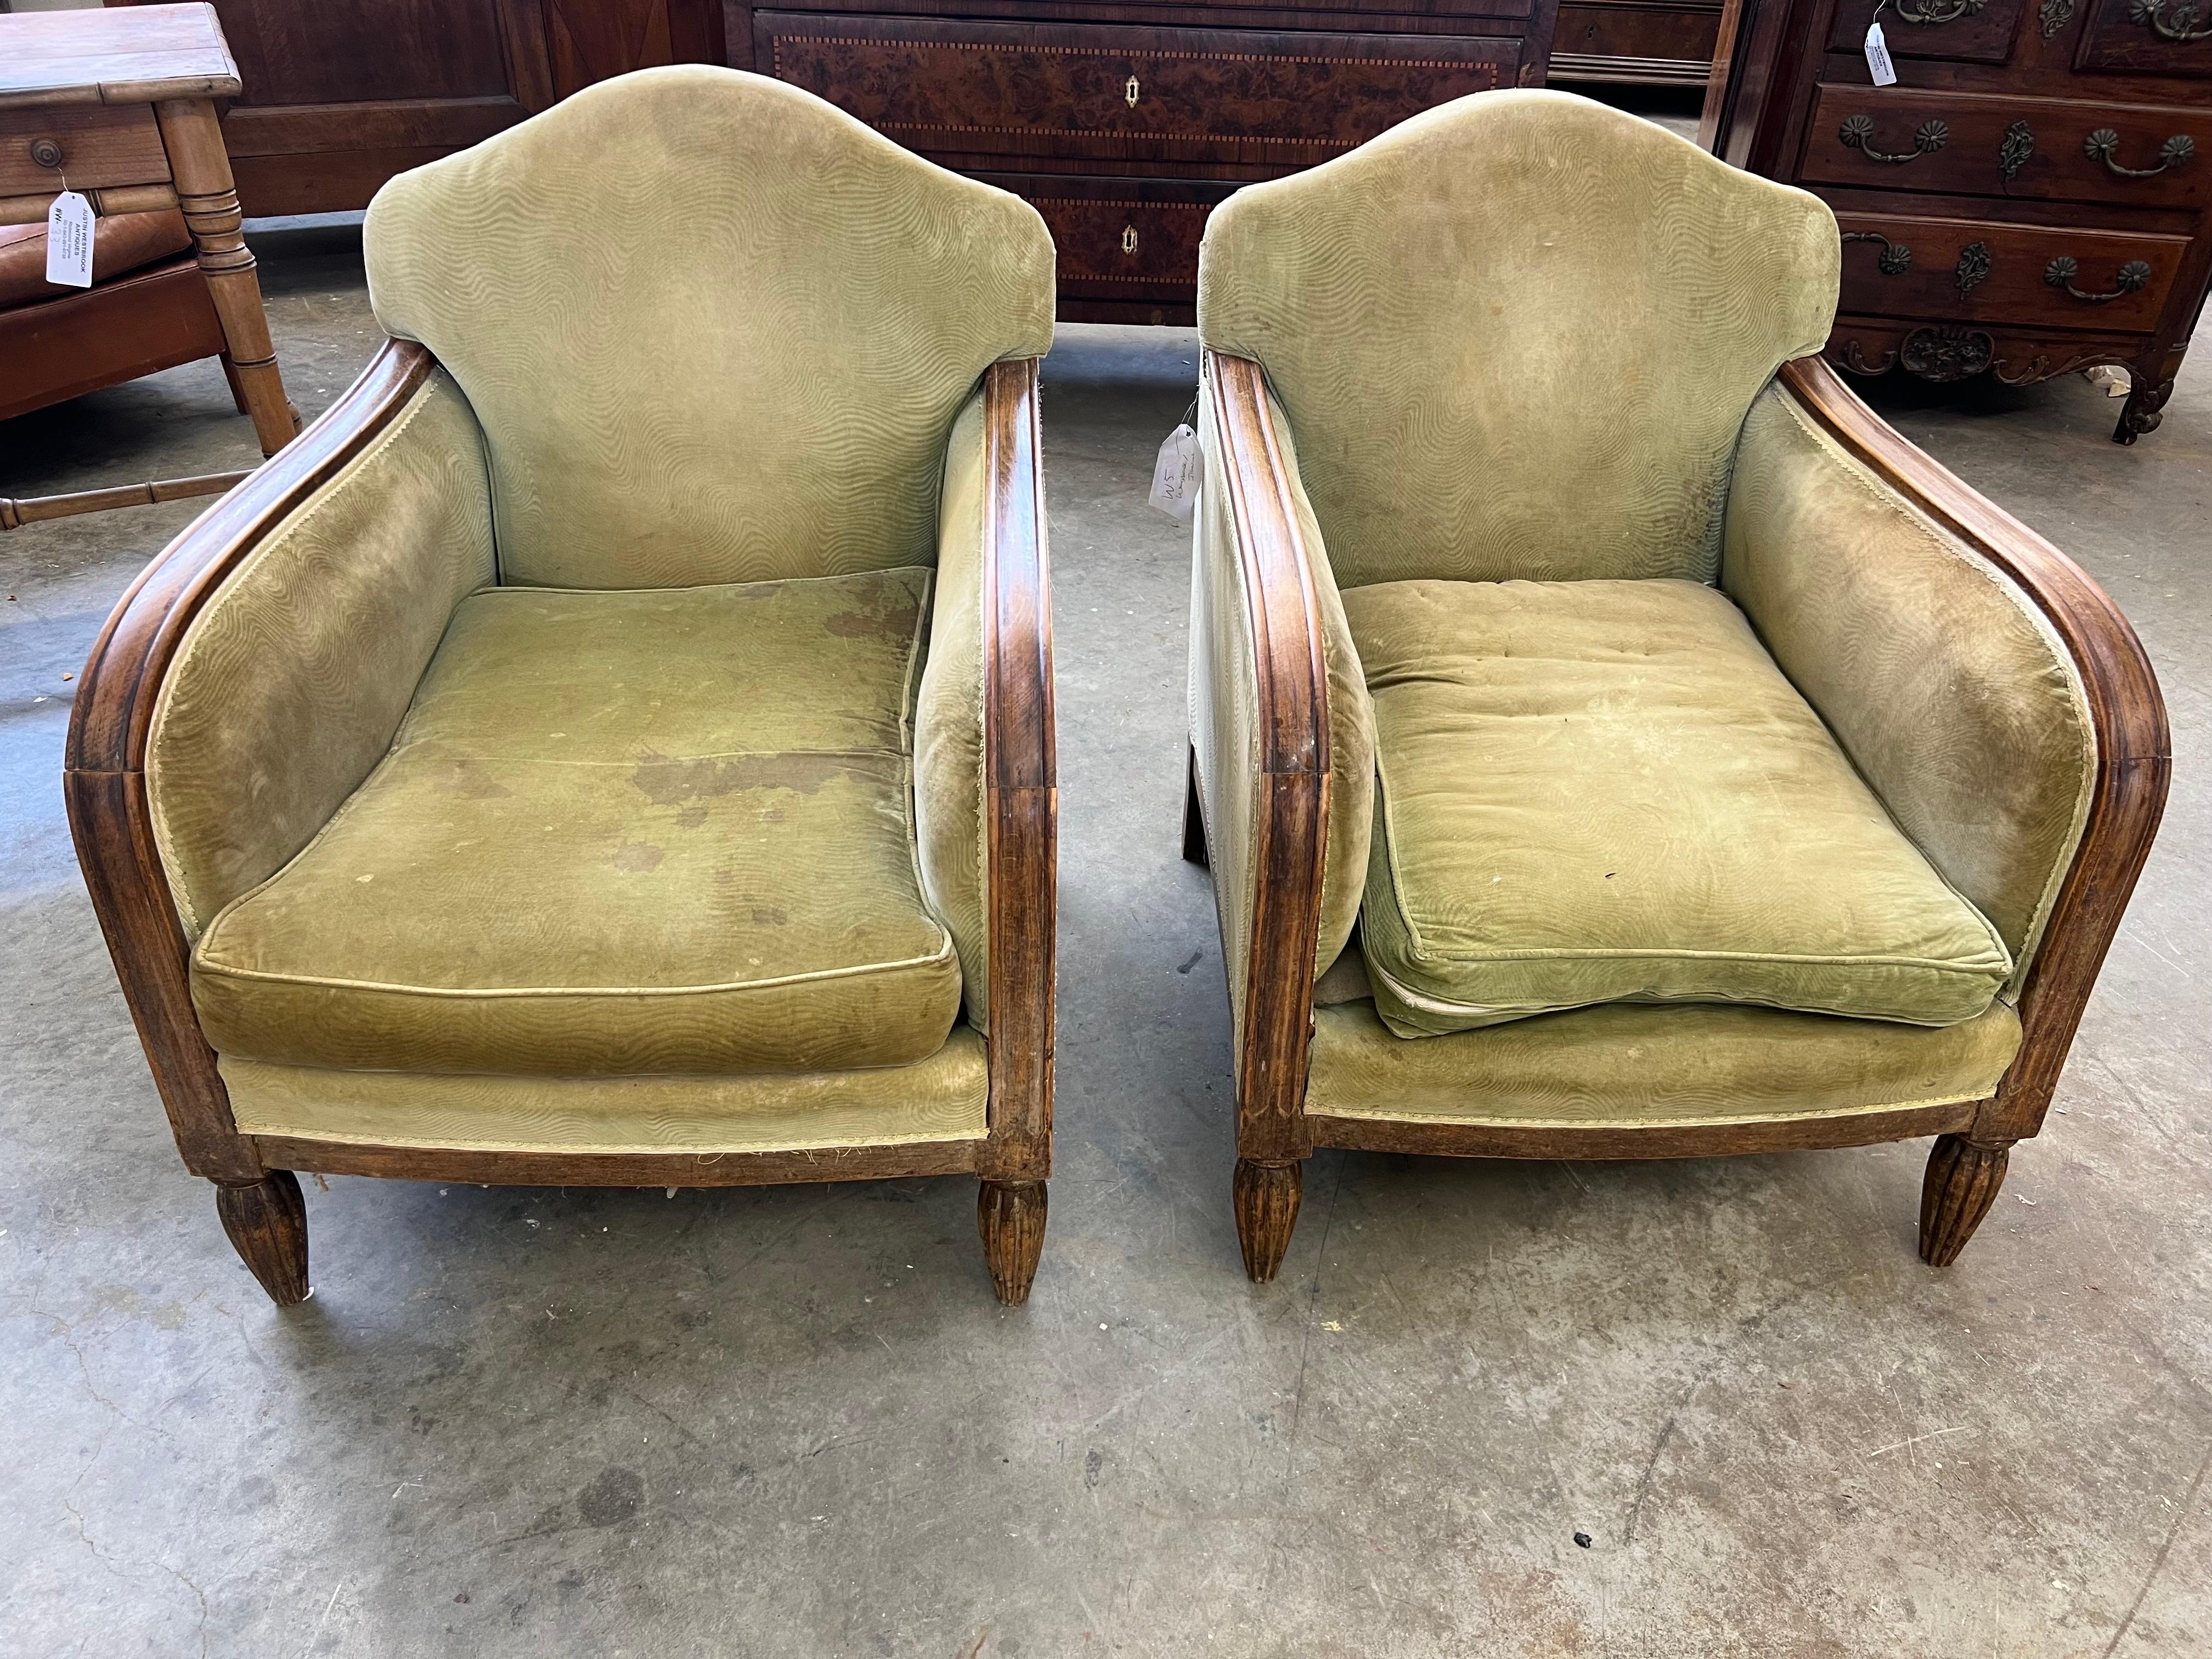 Nice lines and form on this pair of French art deco period club chairs. Nice deep, comfortable seats with original loose cushions. Walnut throughout.